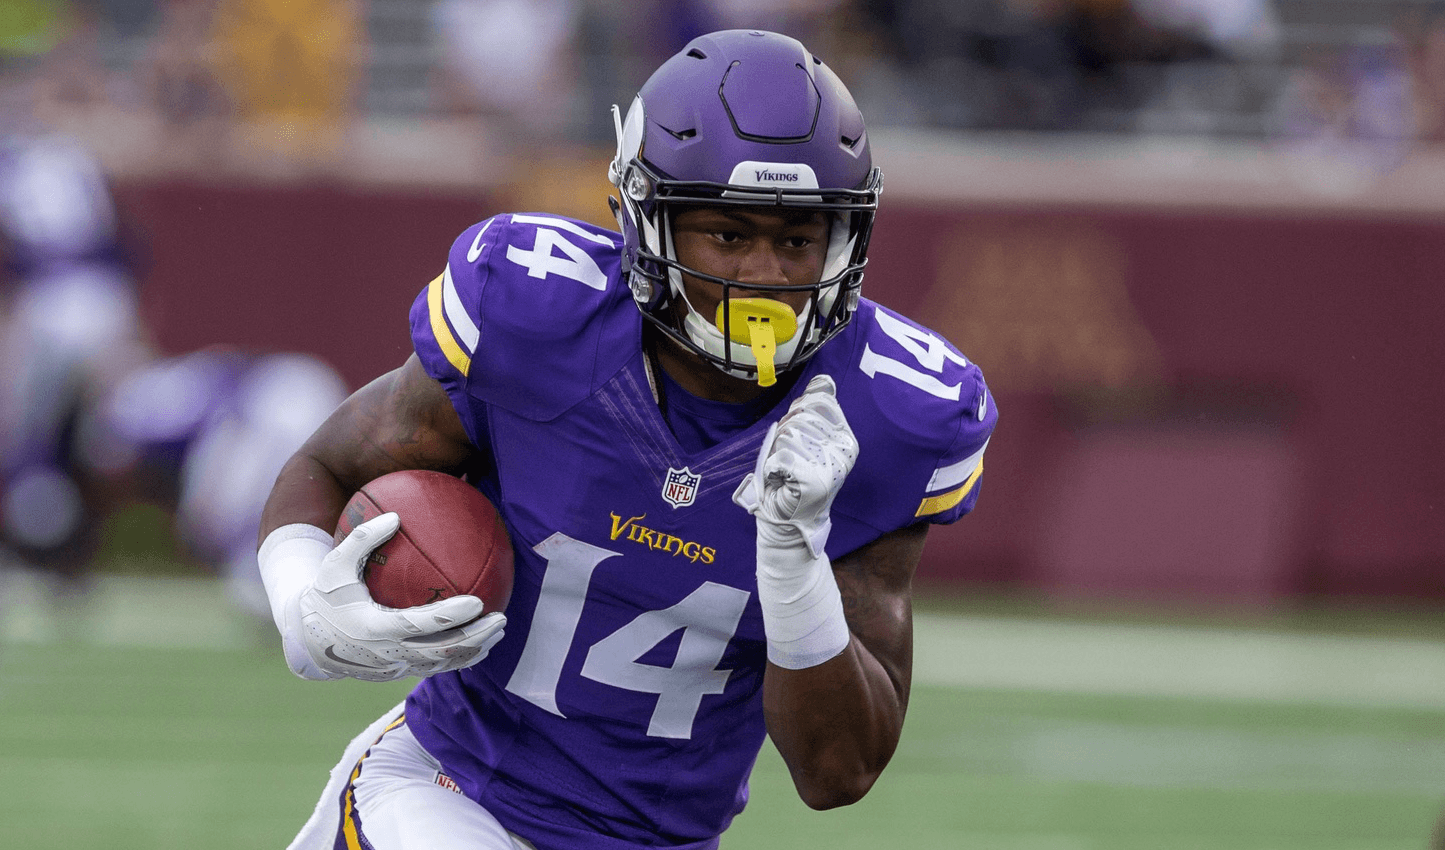 Former Maryland star Diggs declared inactive again. NBC Sports